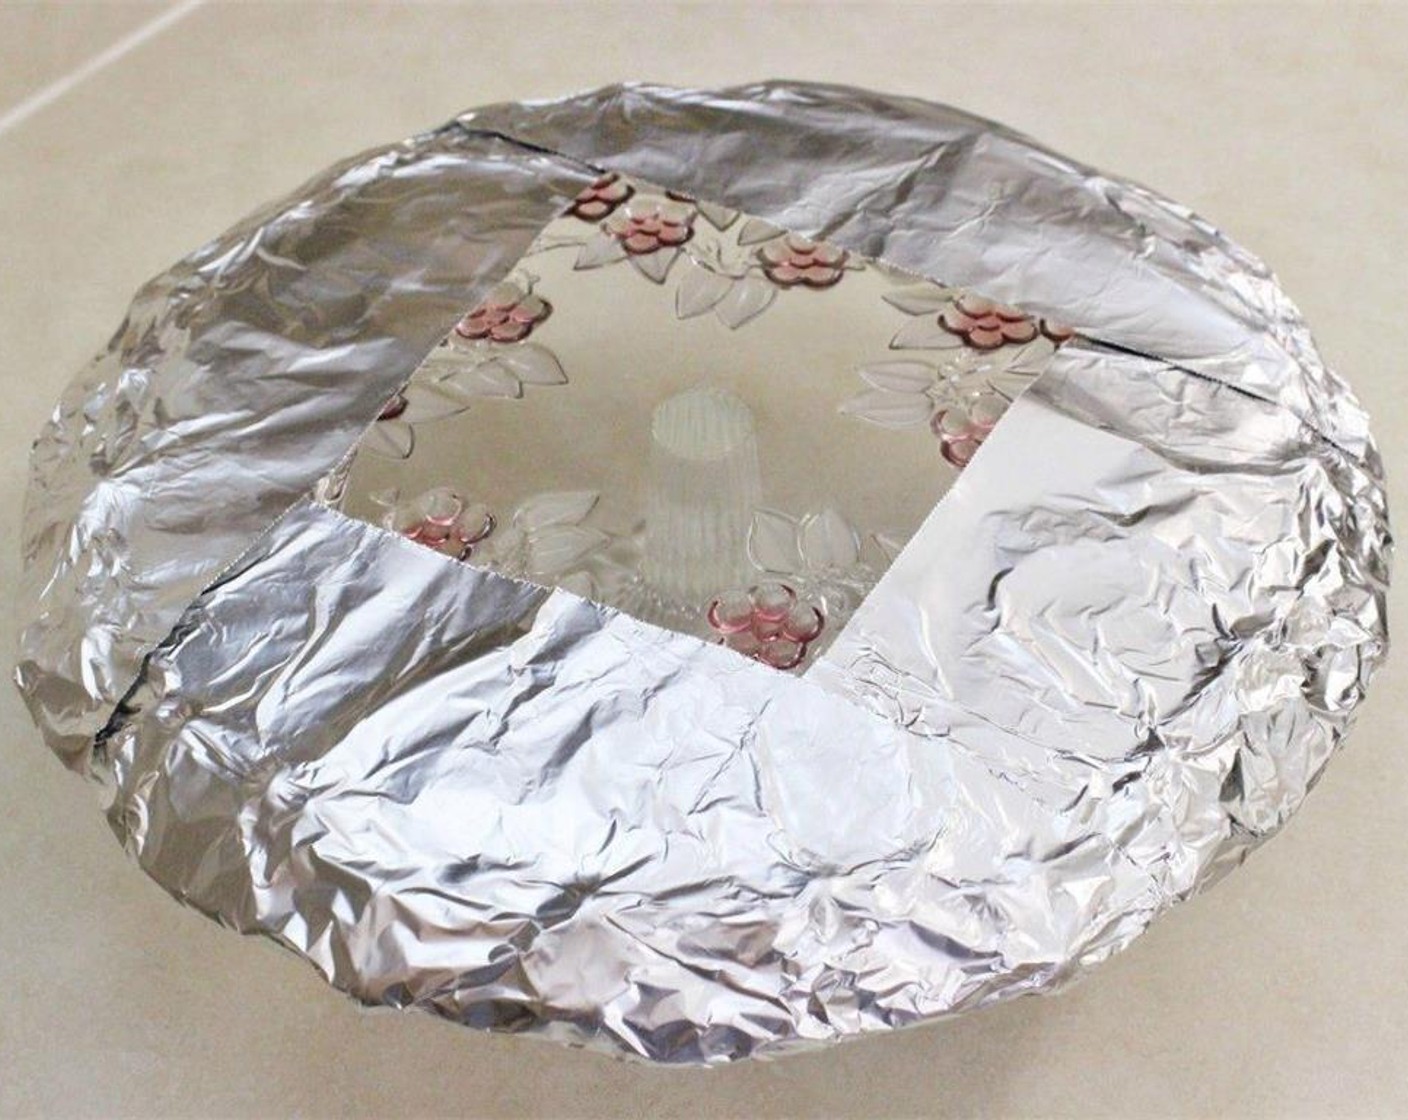 step 12 Line the edges of a cake stand or plate with sheets of aluminum foil. (This is to facilitate easy clean up later.)